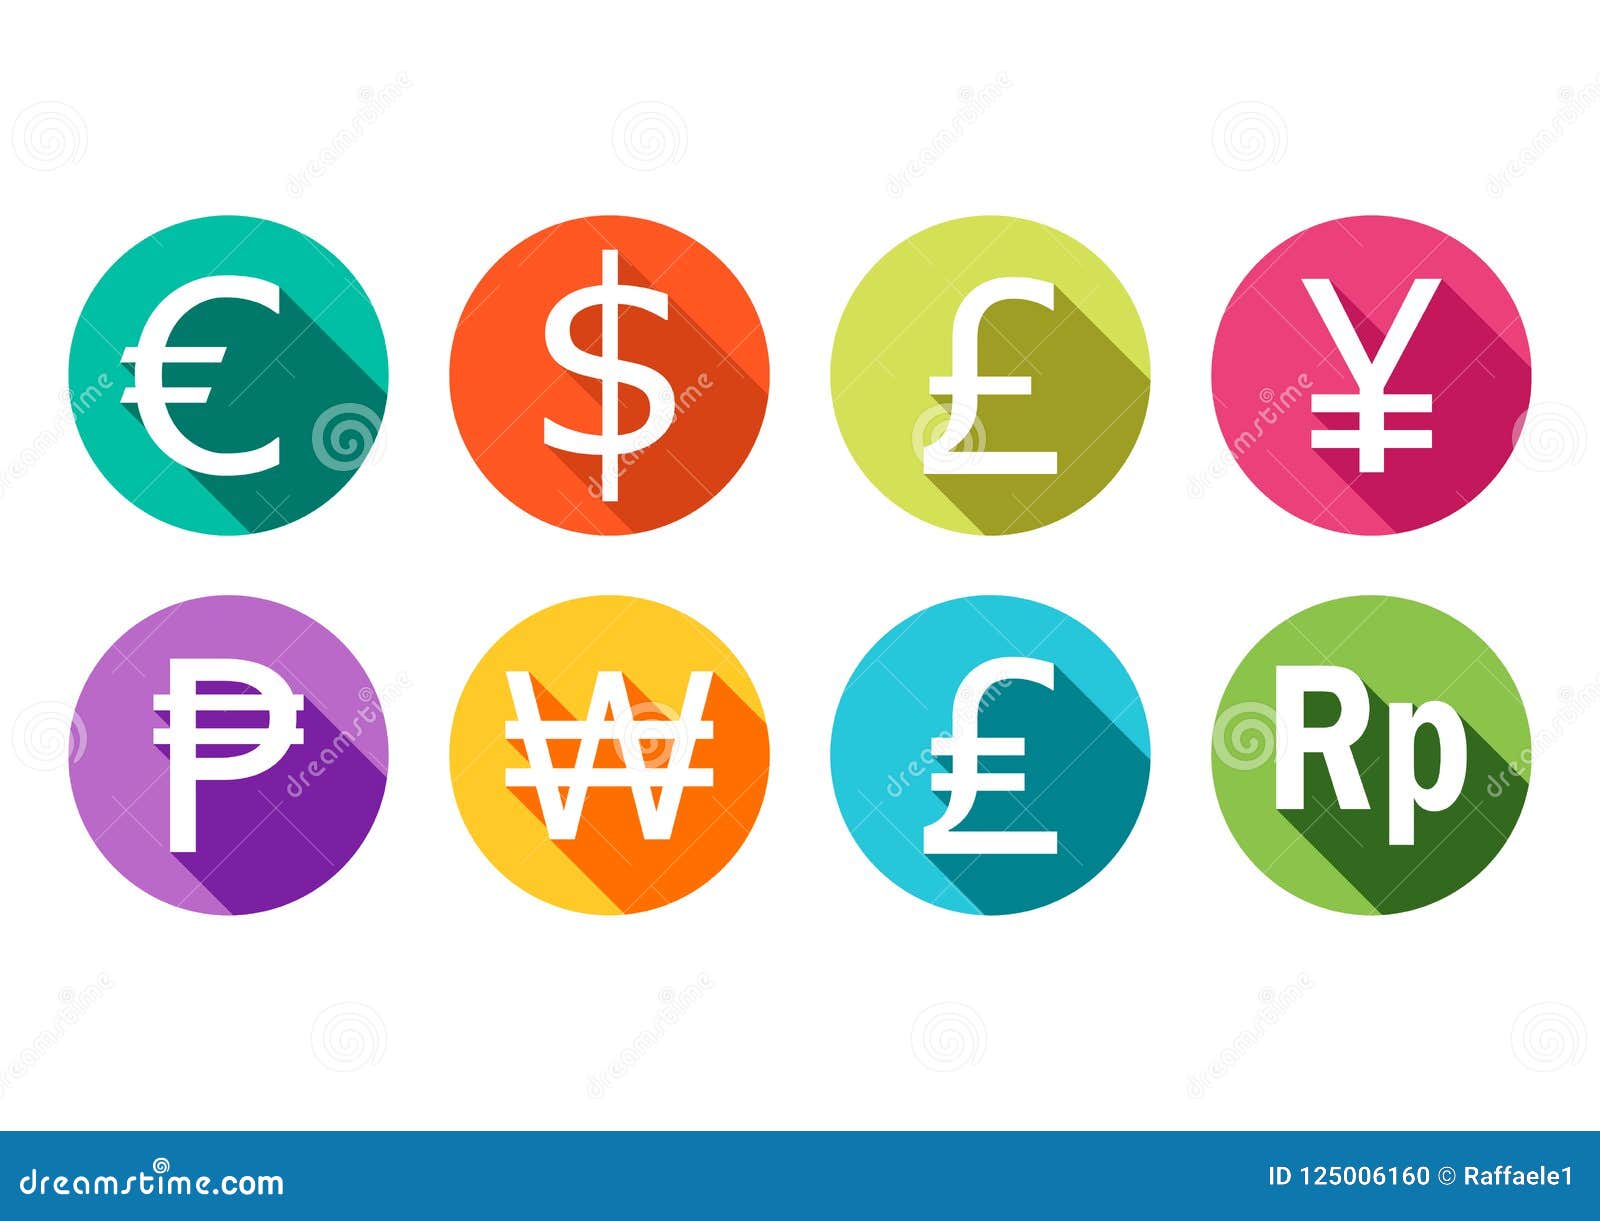  of the euro, the dollar, the pound, the yen, the ruble, the won, and the rupee